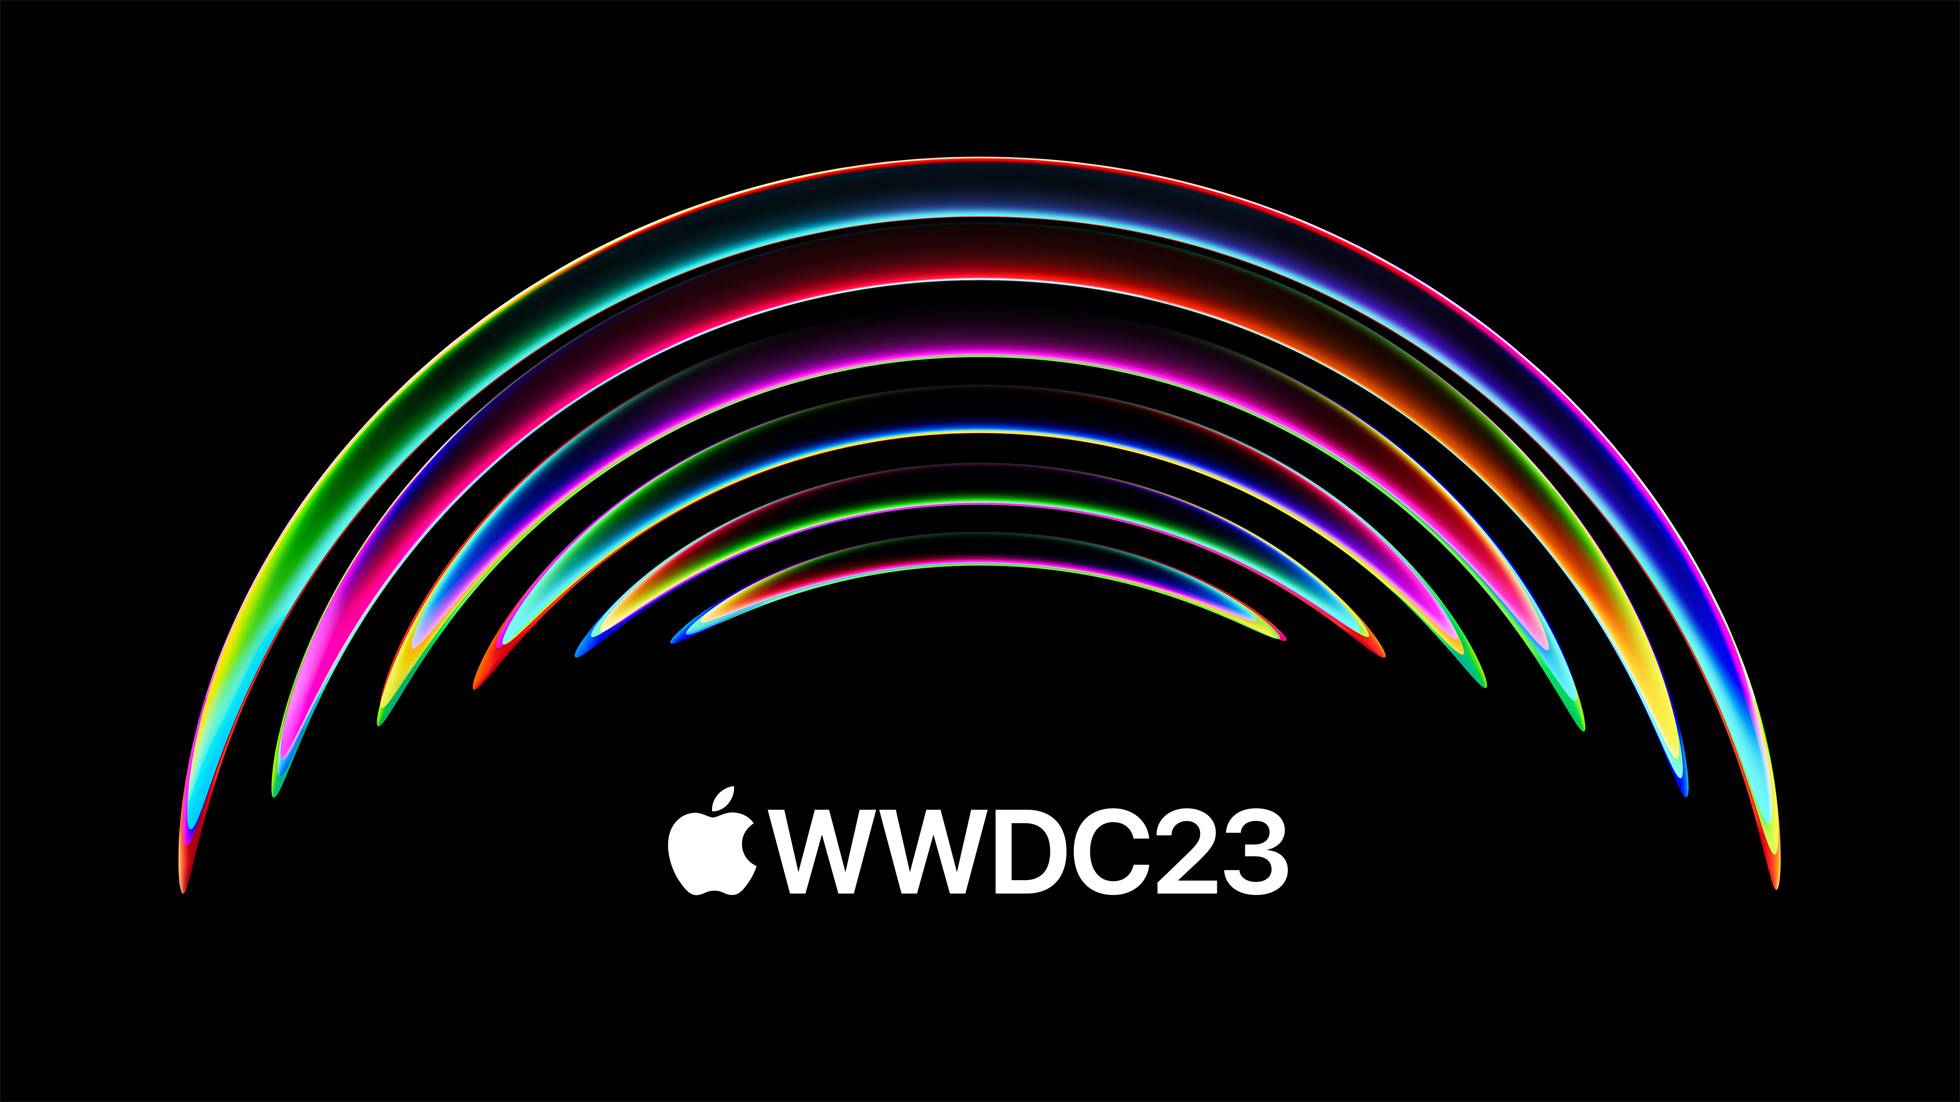 WWDC 2023: Apple's 'biggest and most exciting yet'